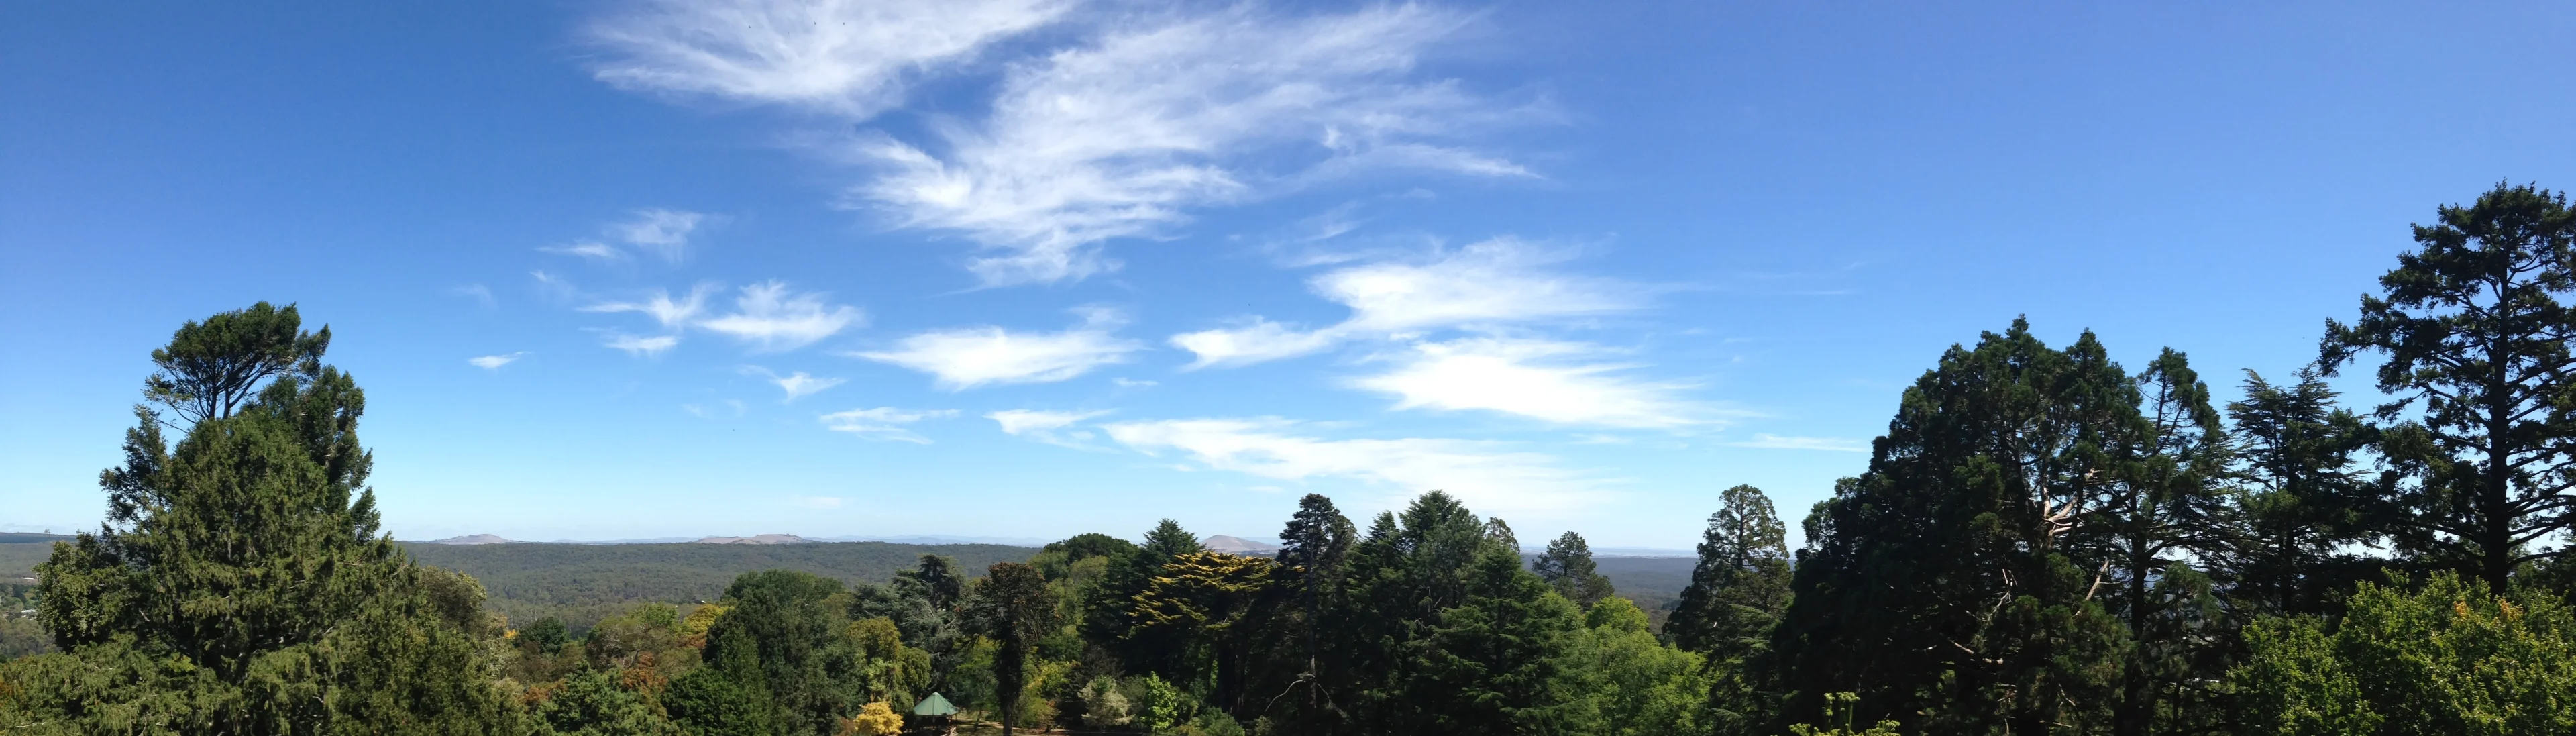 View from Lookout at Wombat Hill Botantical Gardens, Daylesford.